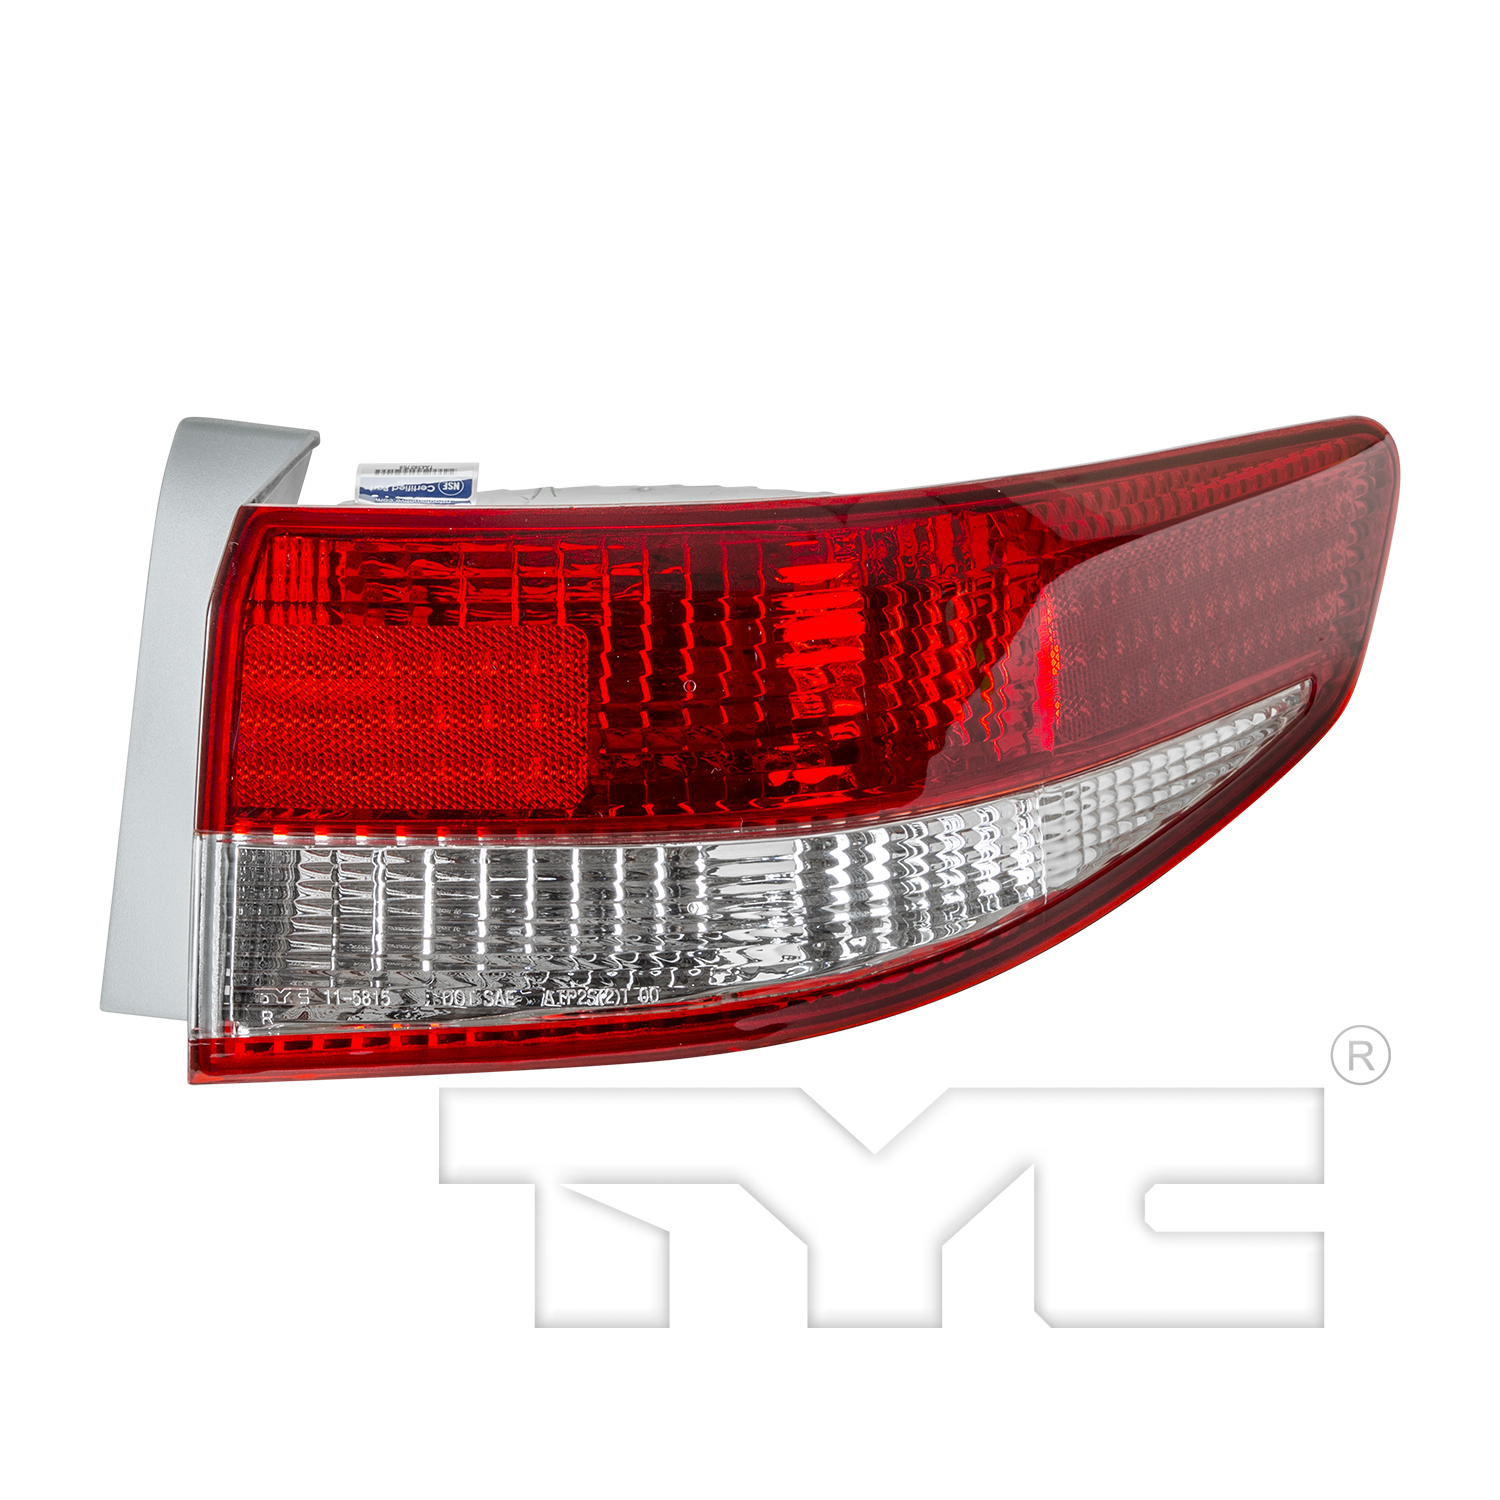 Aftermarket TAILLIGHTS for HONDA - ACCORD, ACCORD,03-04,RT Taillamp assy